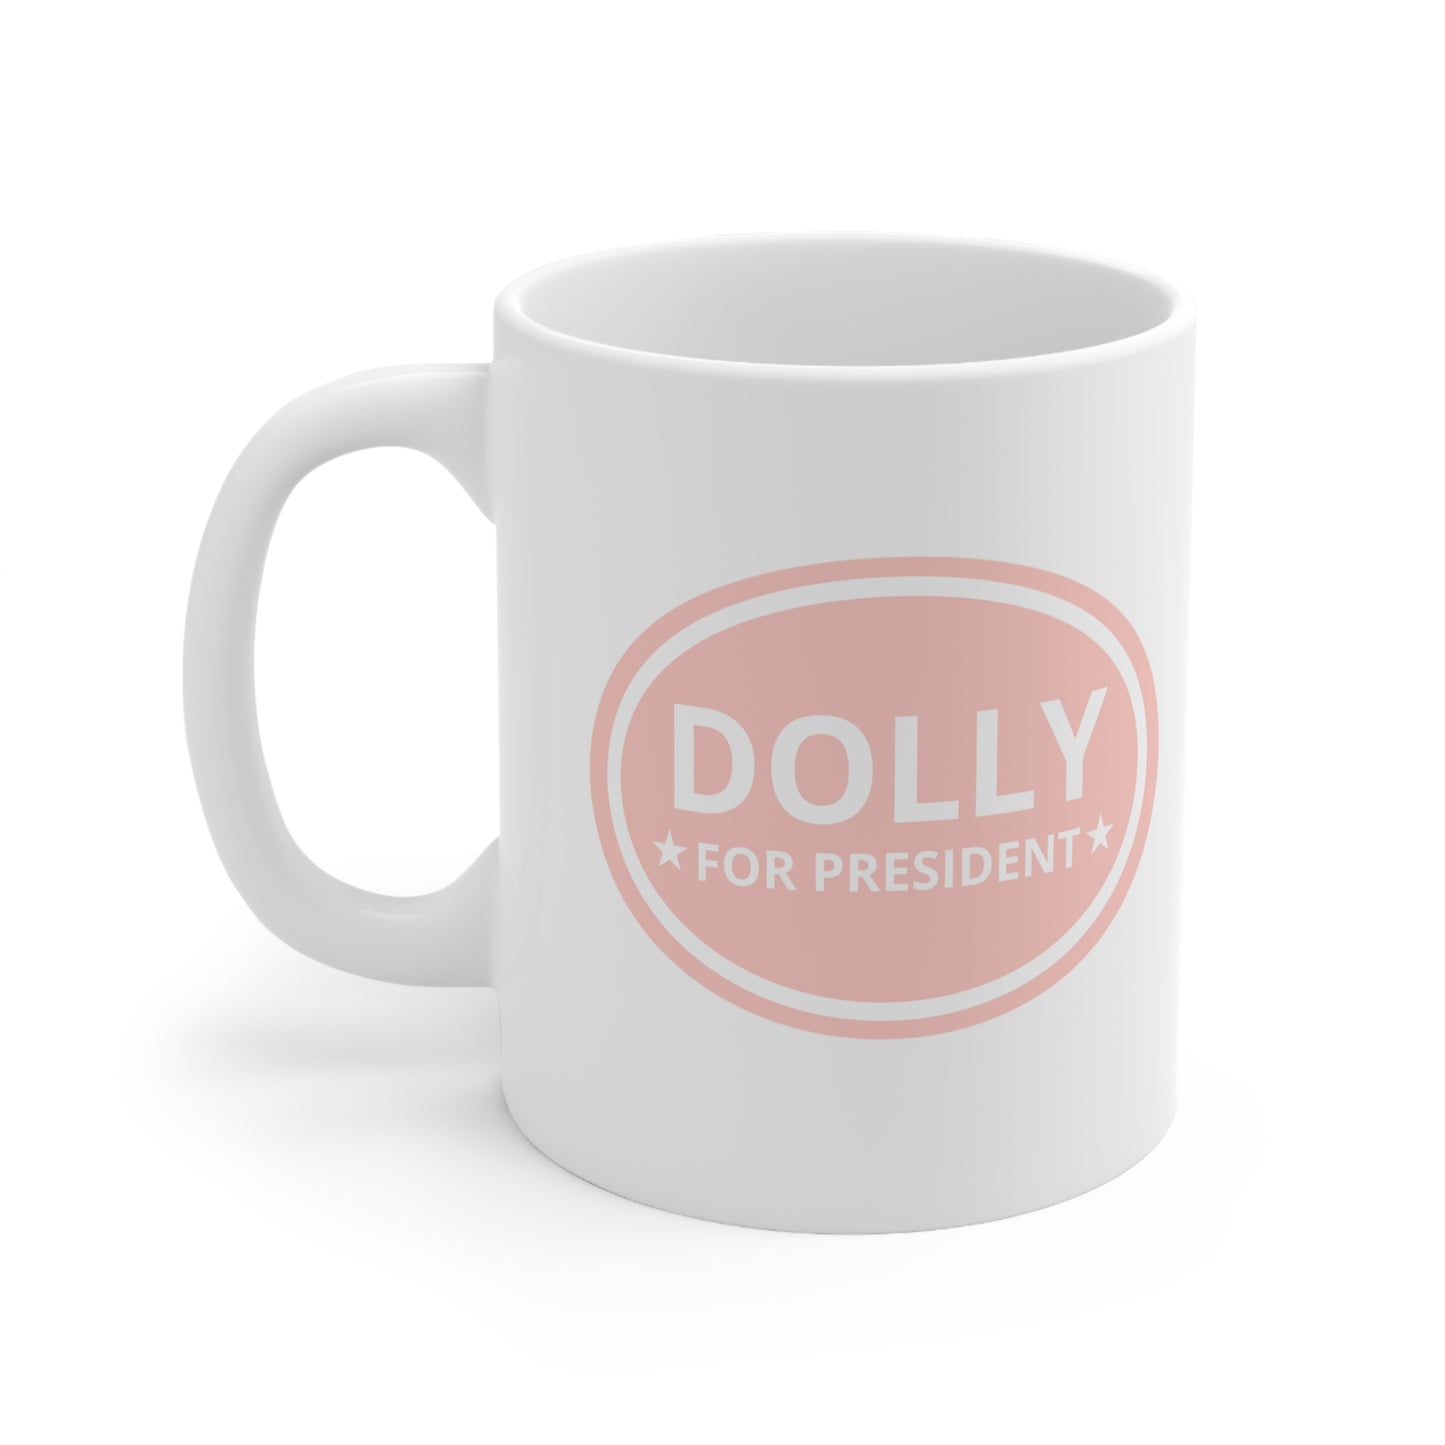 Dolly For President Ceramic Coffee Cup 11oz